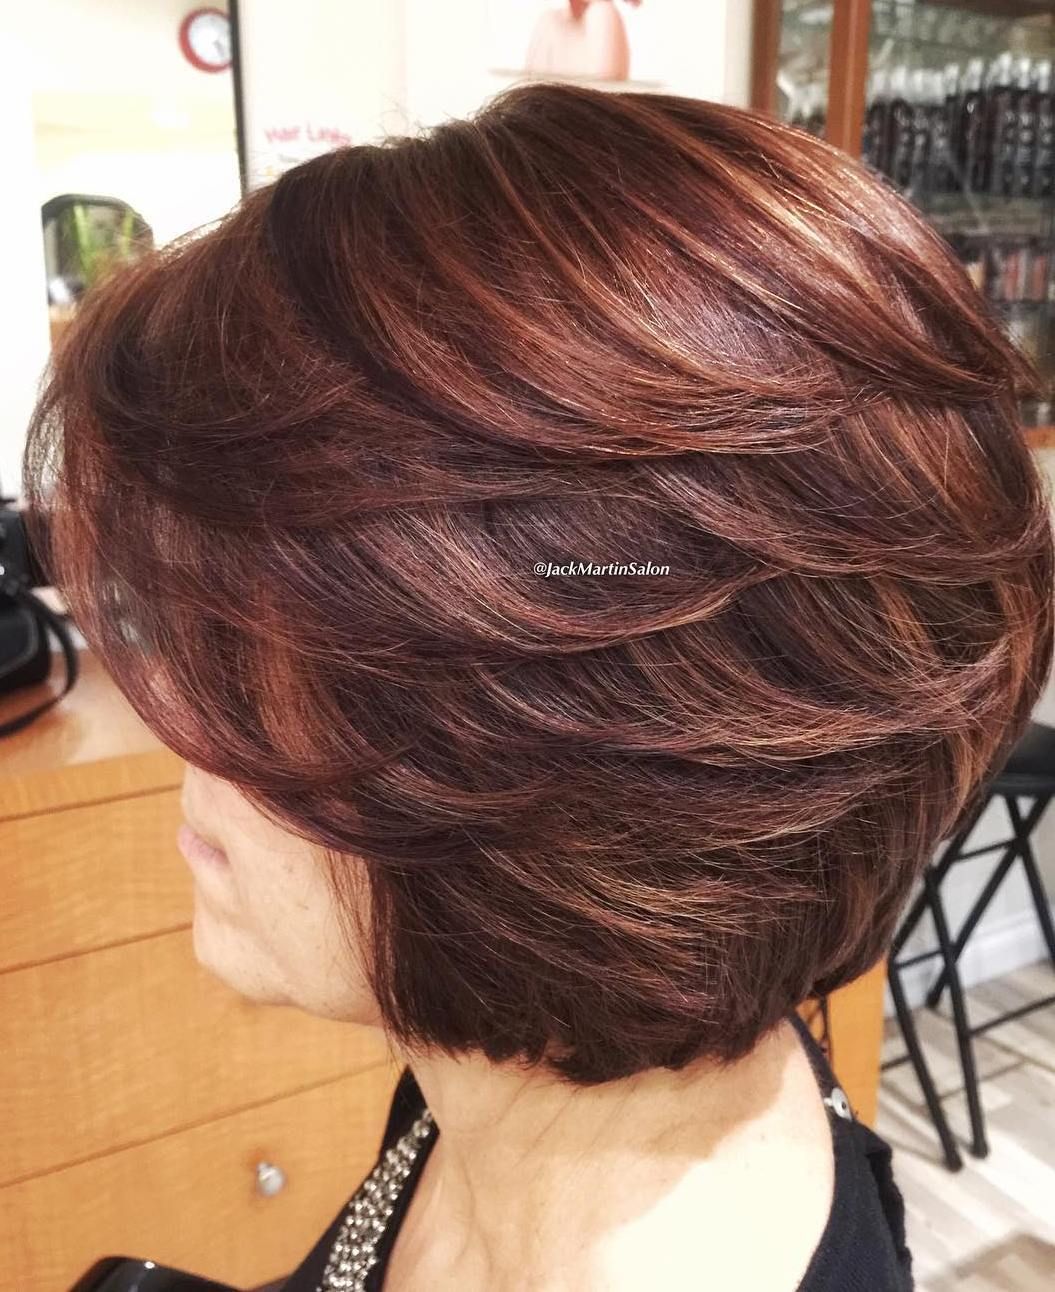 100 Timeless and Trendiest Short Haircut Styles for Over 50 Women fa4838dc35369510301ec856df3e44e8